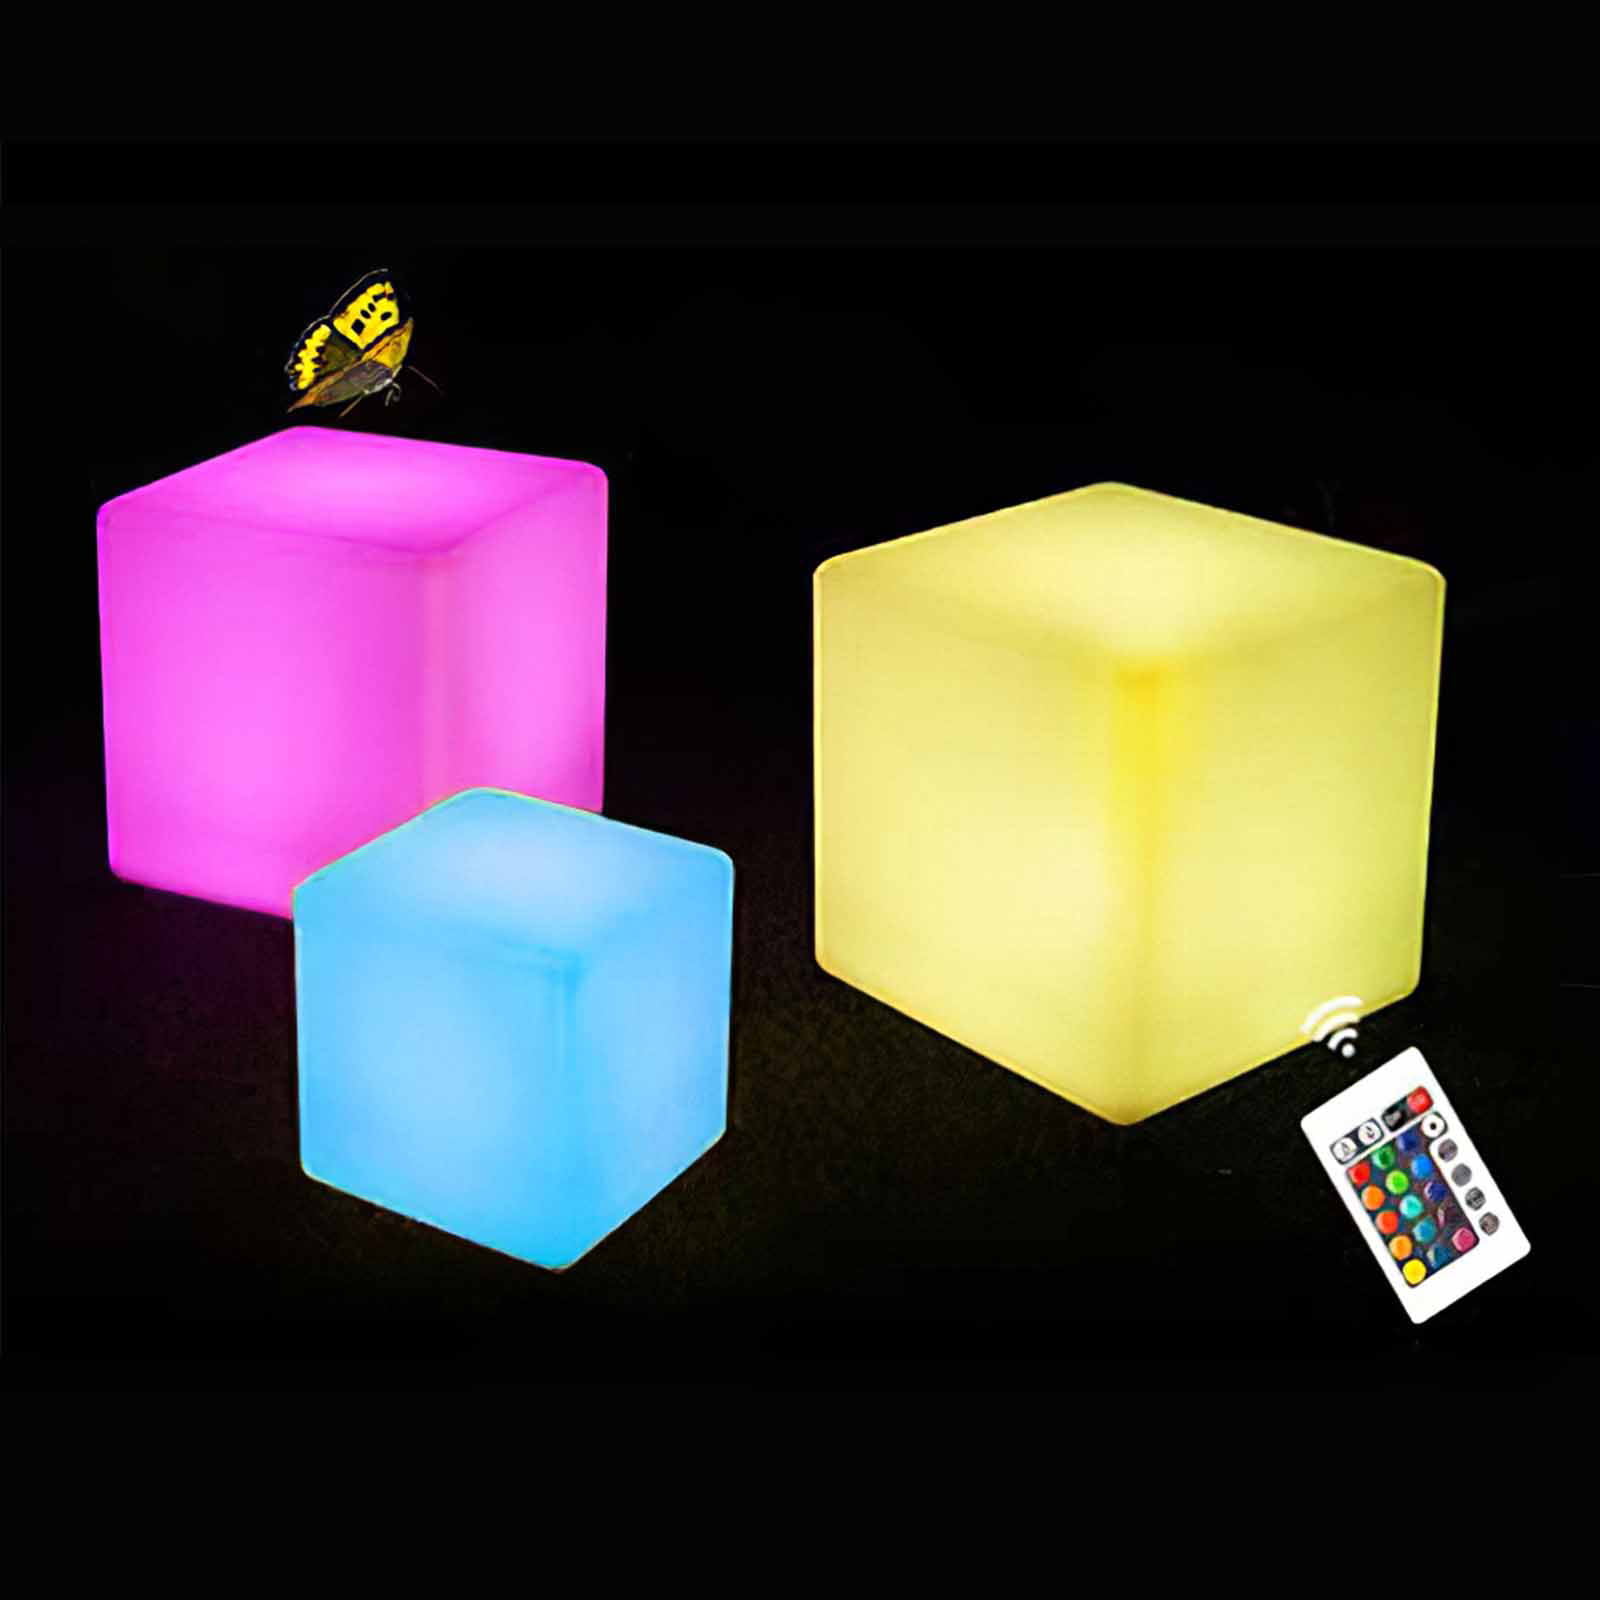 RGBW 35x35 LED RGBW rechargeable luminous cube